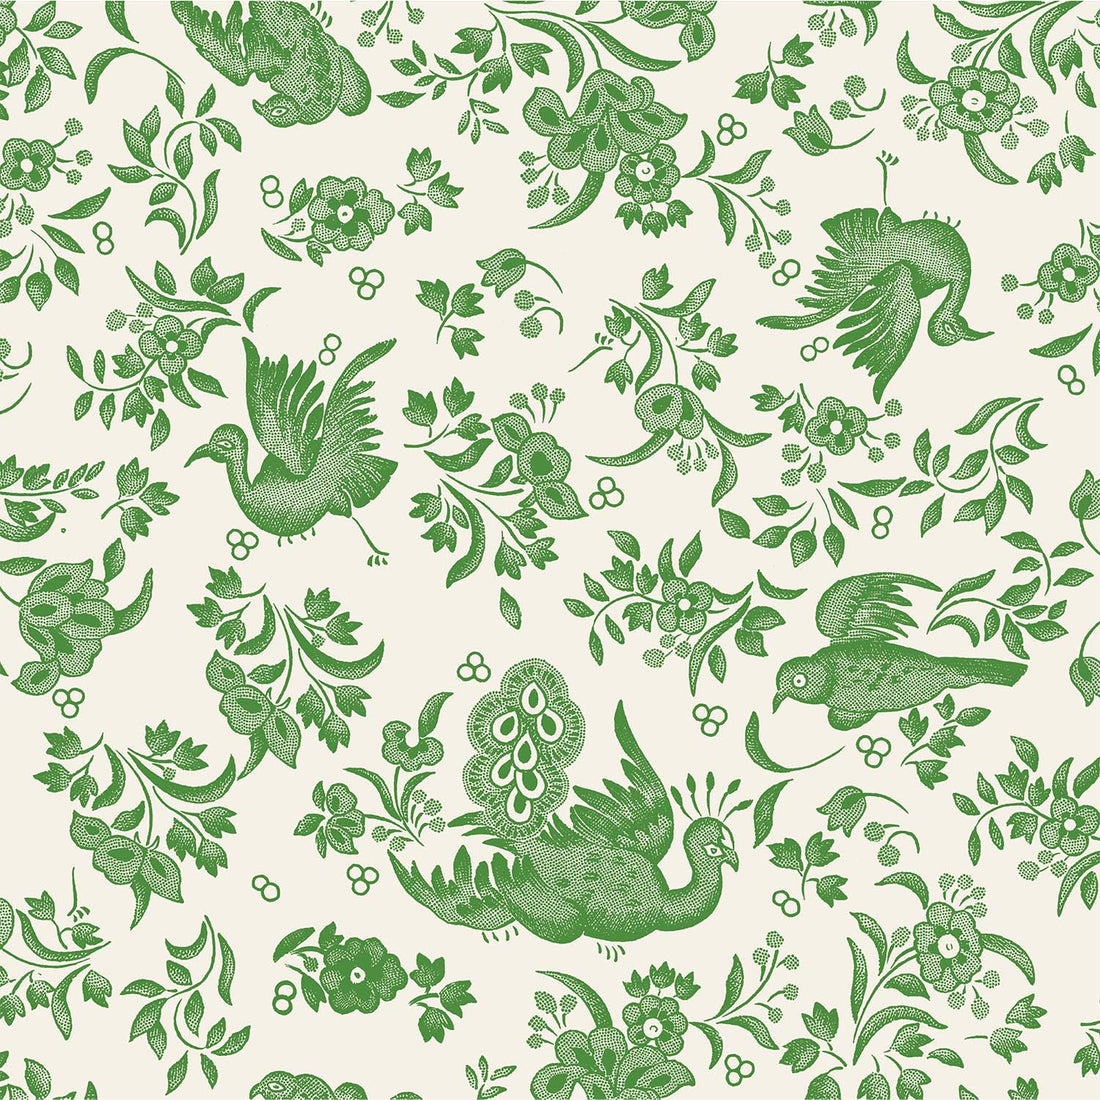 A square cocktail napkin featuring a green bird and floral pattern on a white background, inspired by the ornamental bird pattern from Burleigh.